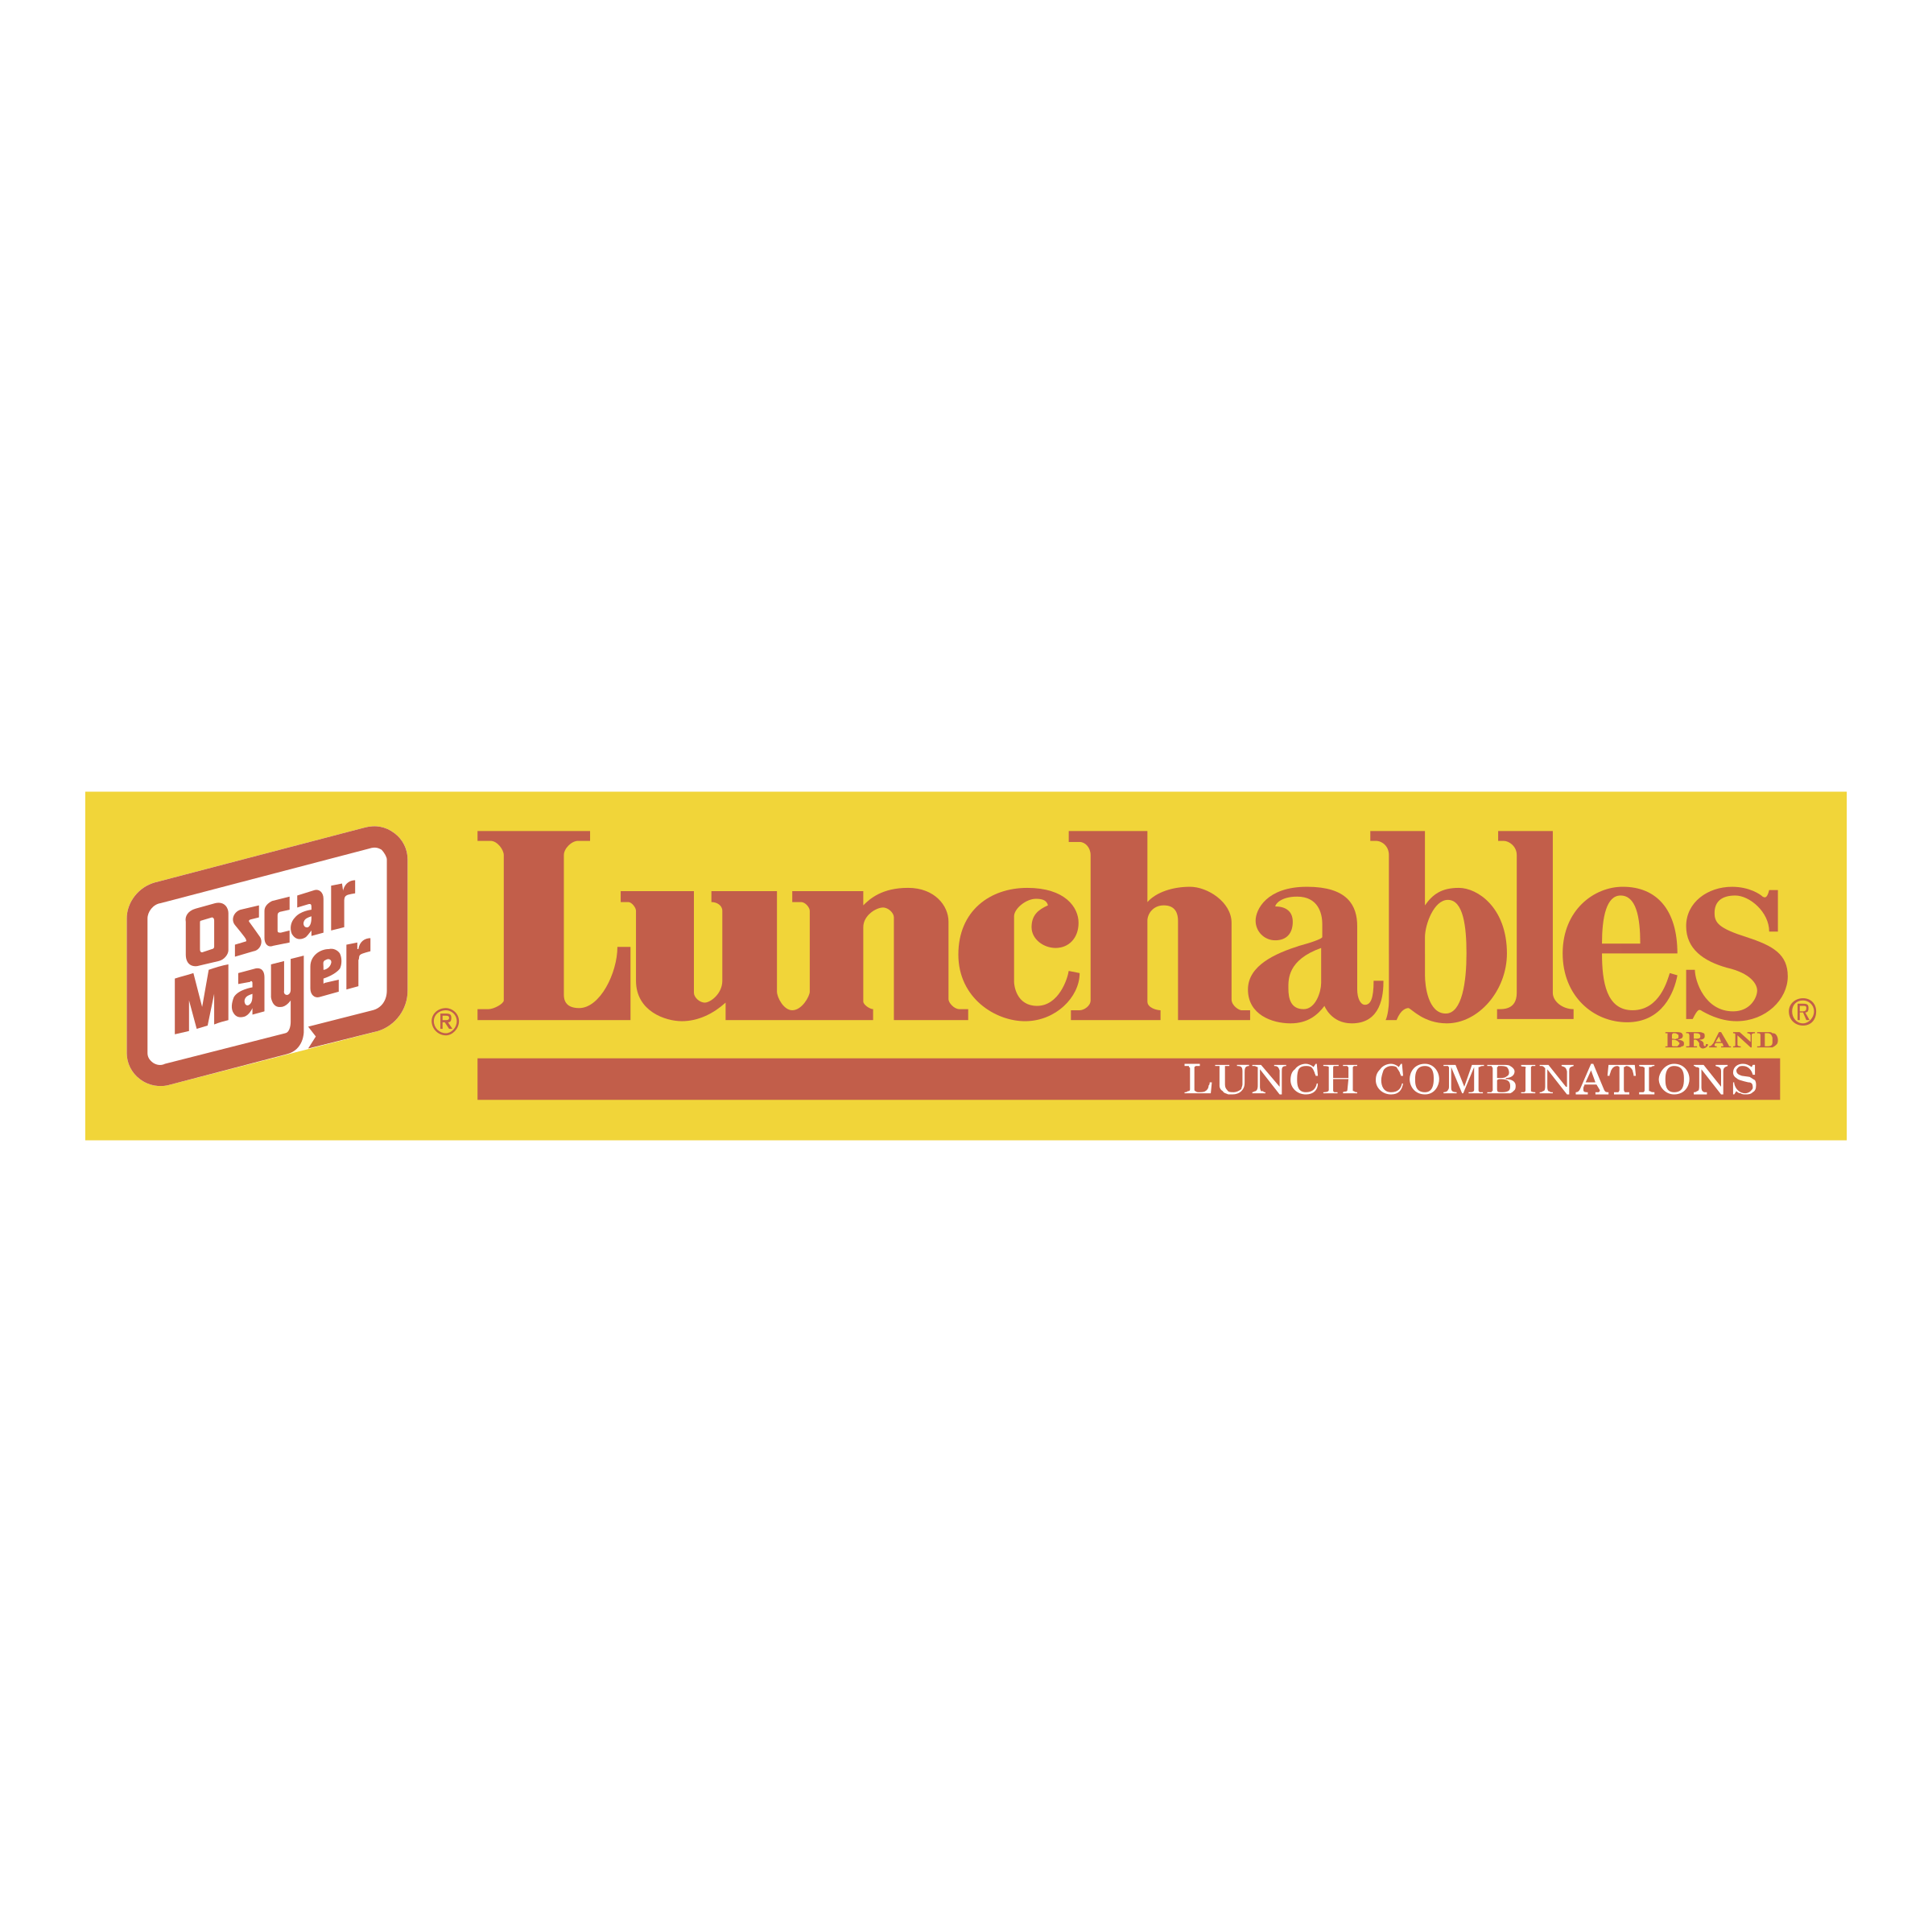 Lunchables Logo - Lunchables Logo PNG Transparent & SVG Vector - Freebie Supply